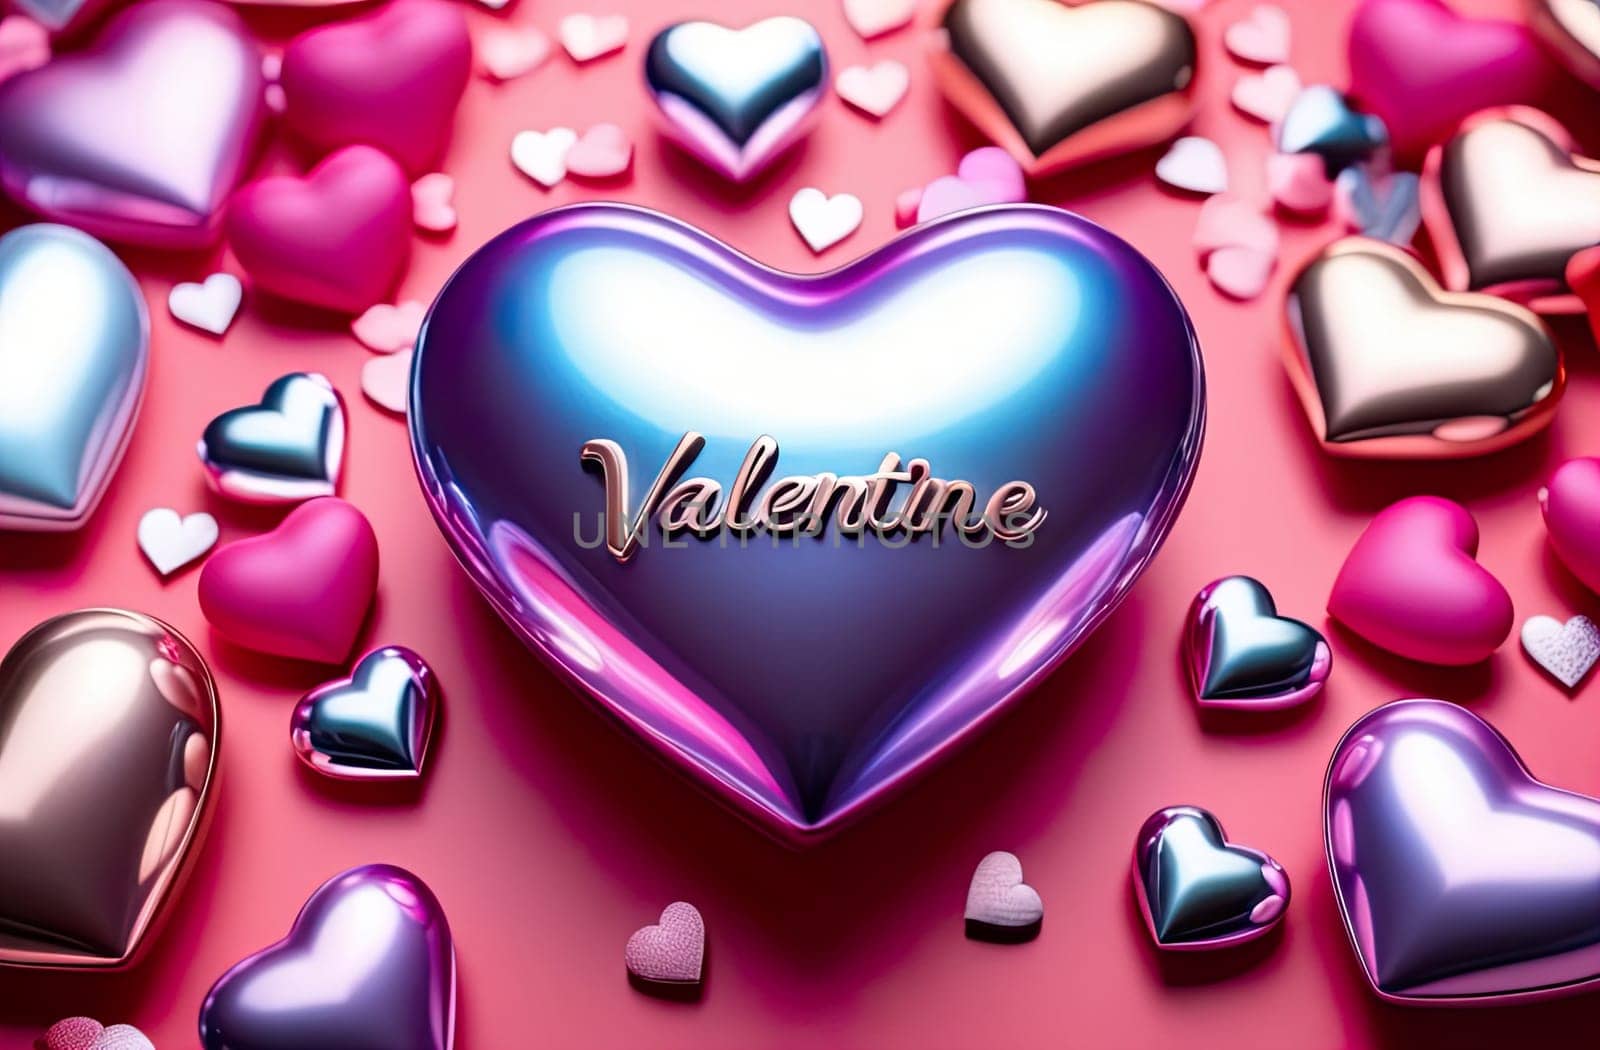 rainbow heart holographic background, colorful small shiny hearts, symbol of love. Valentine's Day, 14 february, romantic date concept